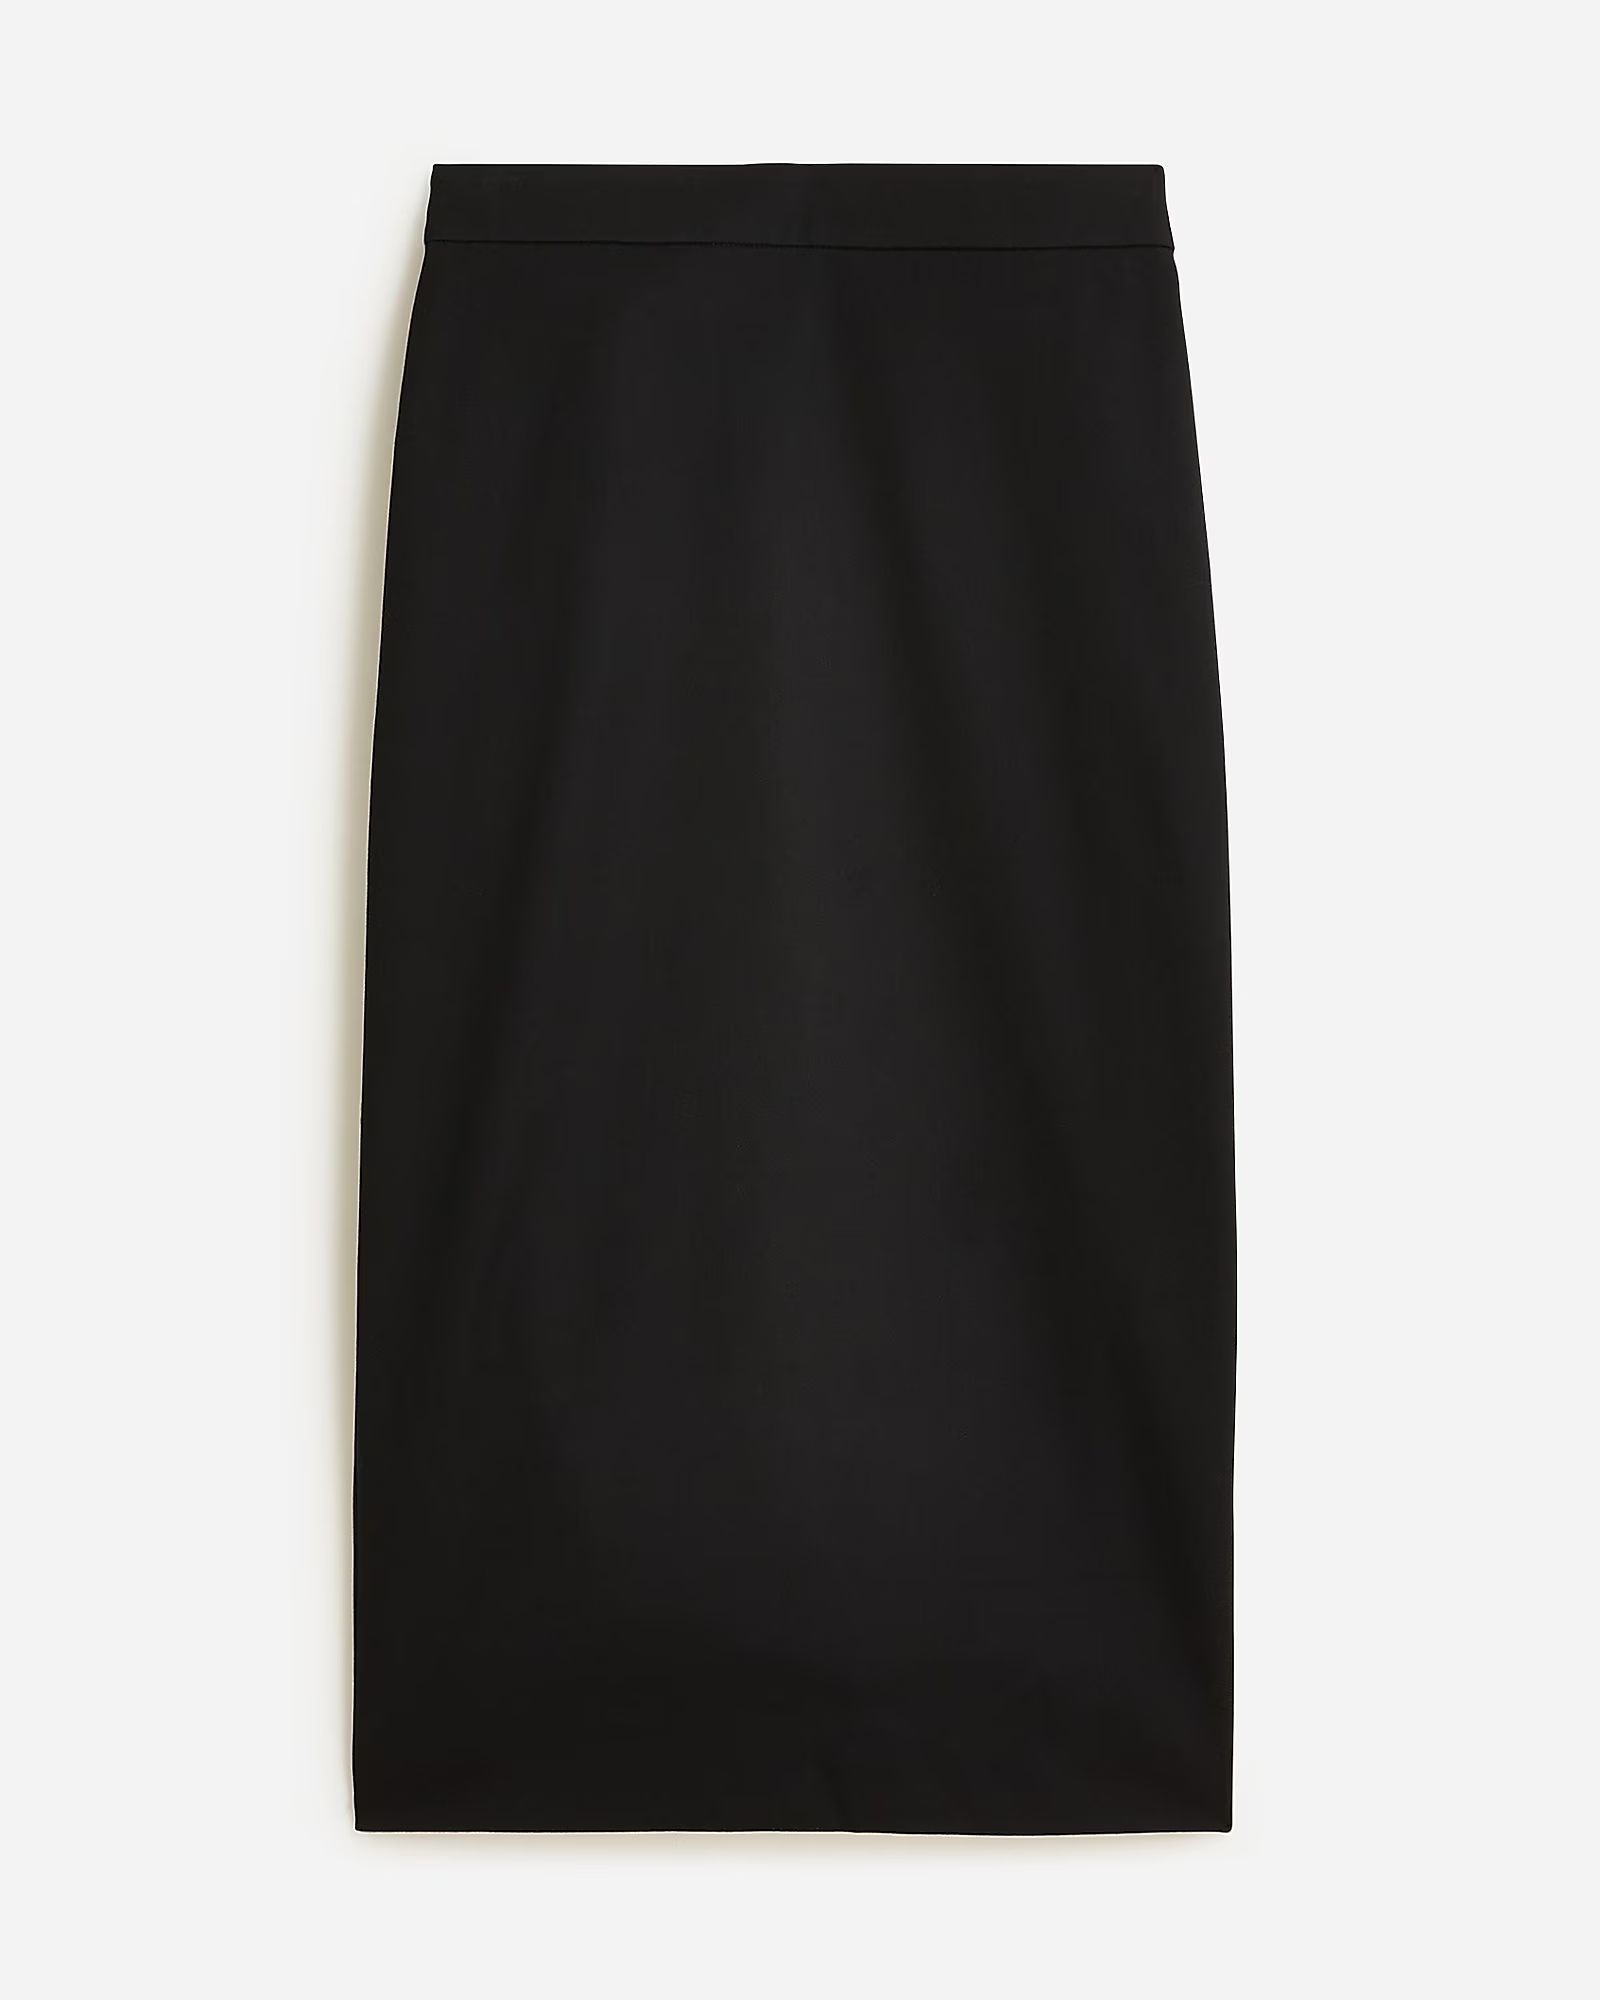 best seller4.3(107 REVIEWS)No. 3 Pencil skirt in bi-stretch cotton blend30% off full price with c... | J.Crew US